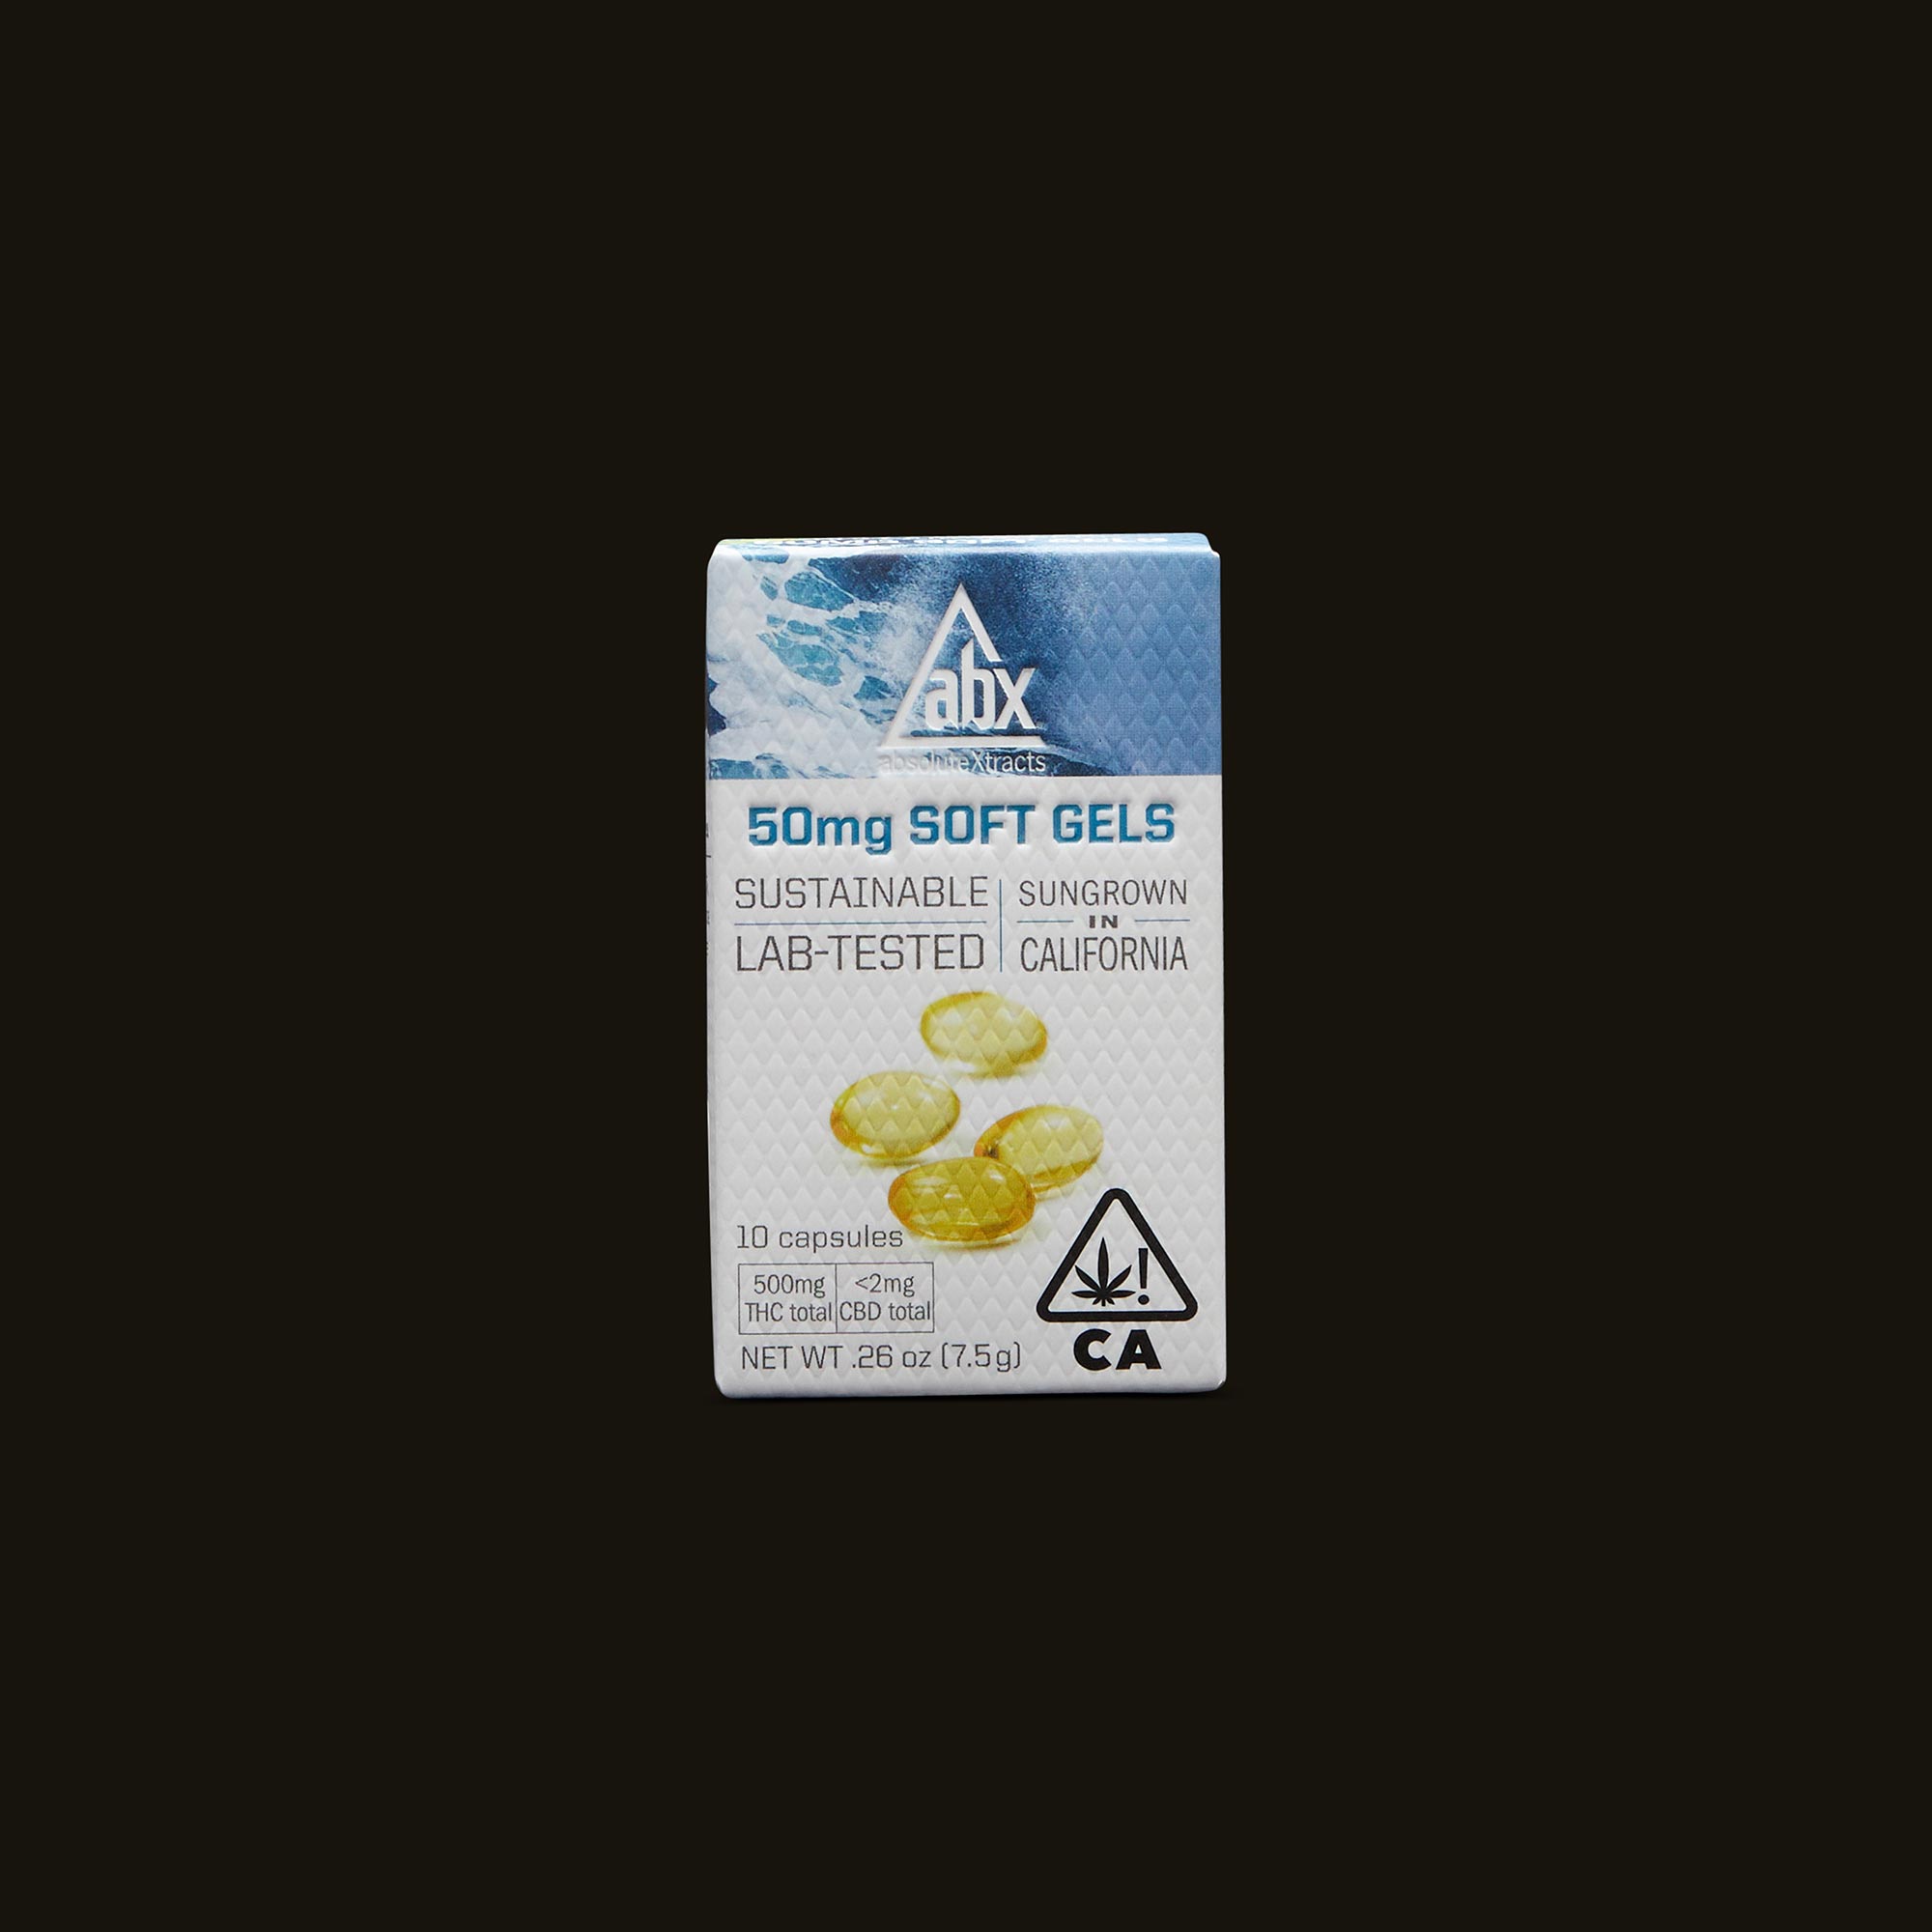 AbsoluteXtracts-50mg-Soft-Gels-Capsules-Box-Front-CA-2440-810496